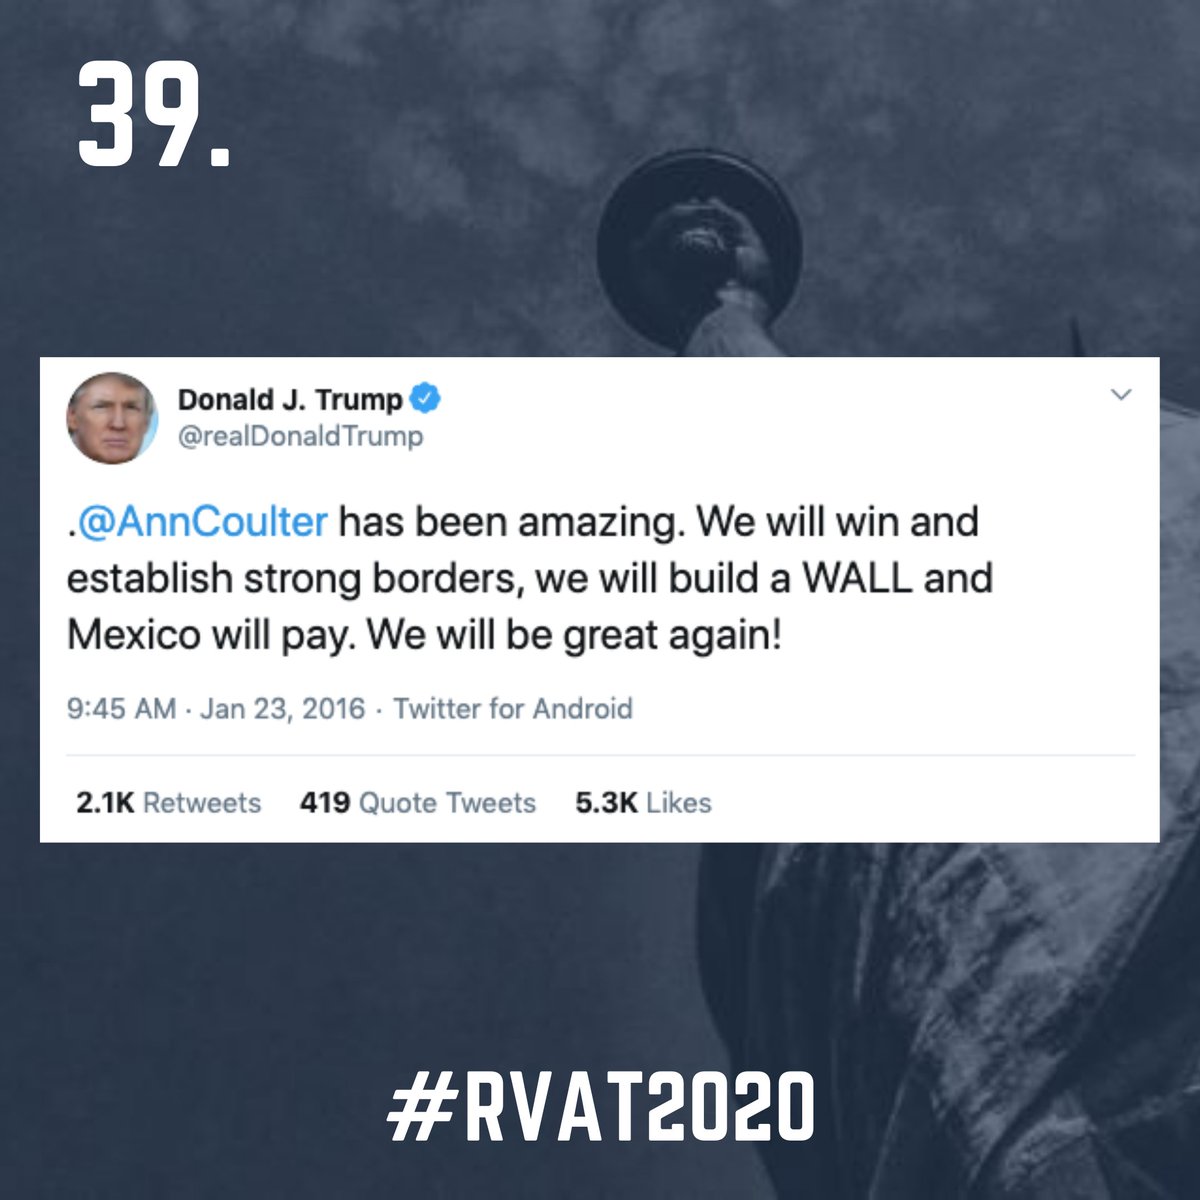 39. It's September 25, 2020. How's that wall going? https://www.politifact.com/truth-o-meter/promises/trumpometer/promise/1397/build-wall-and-make-mexico-pay-it/